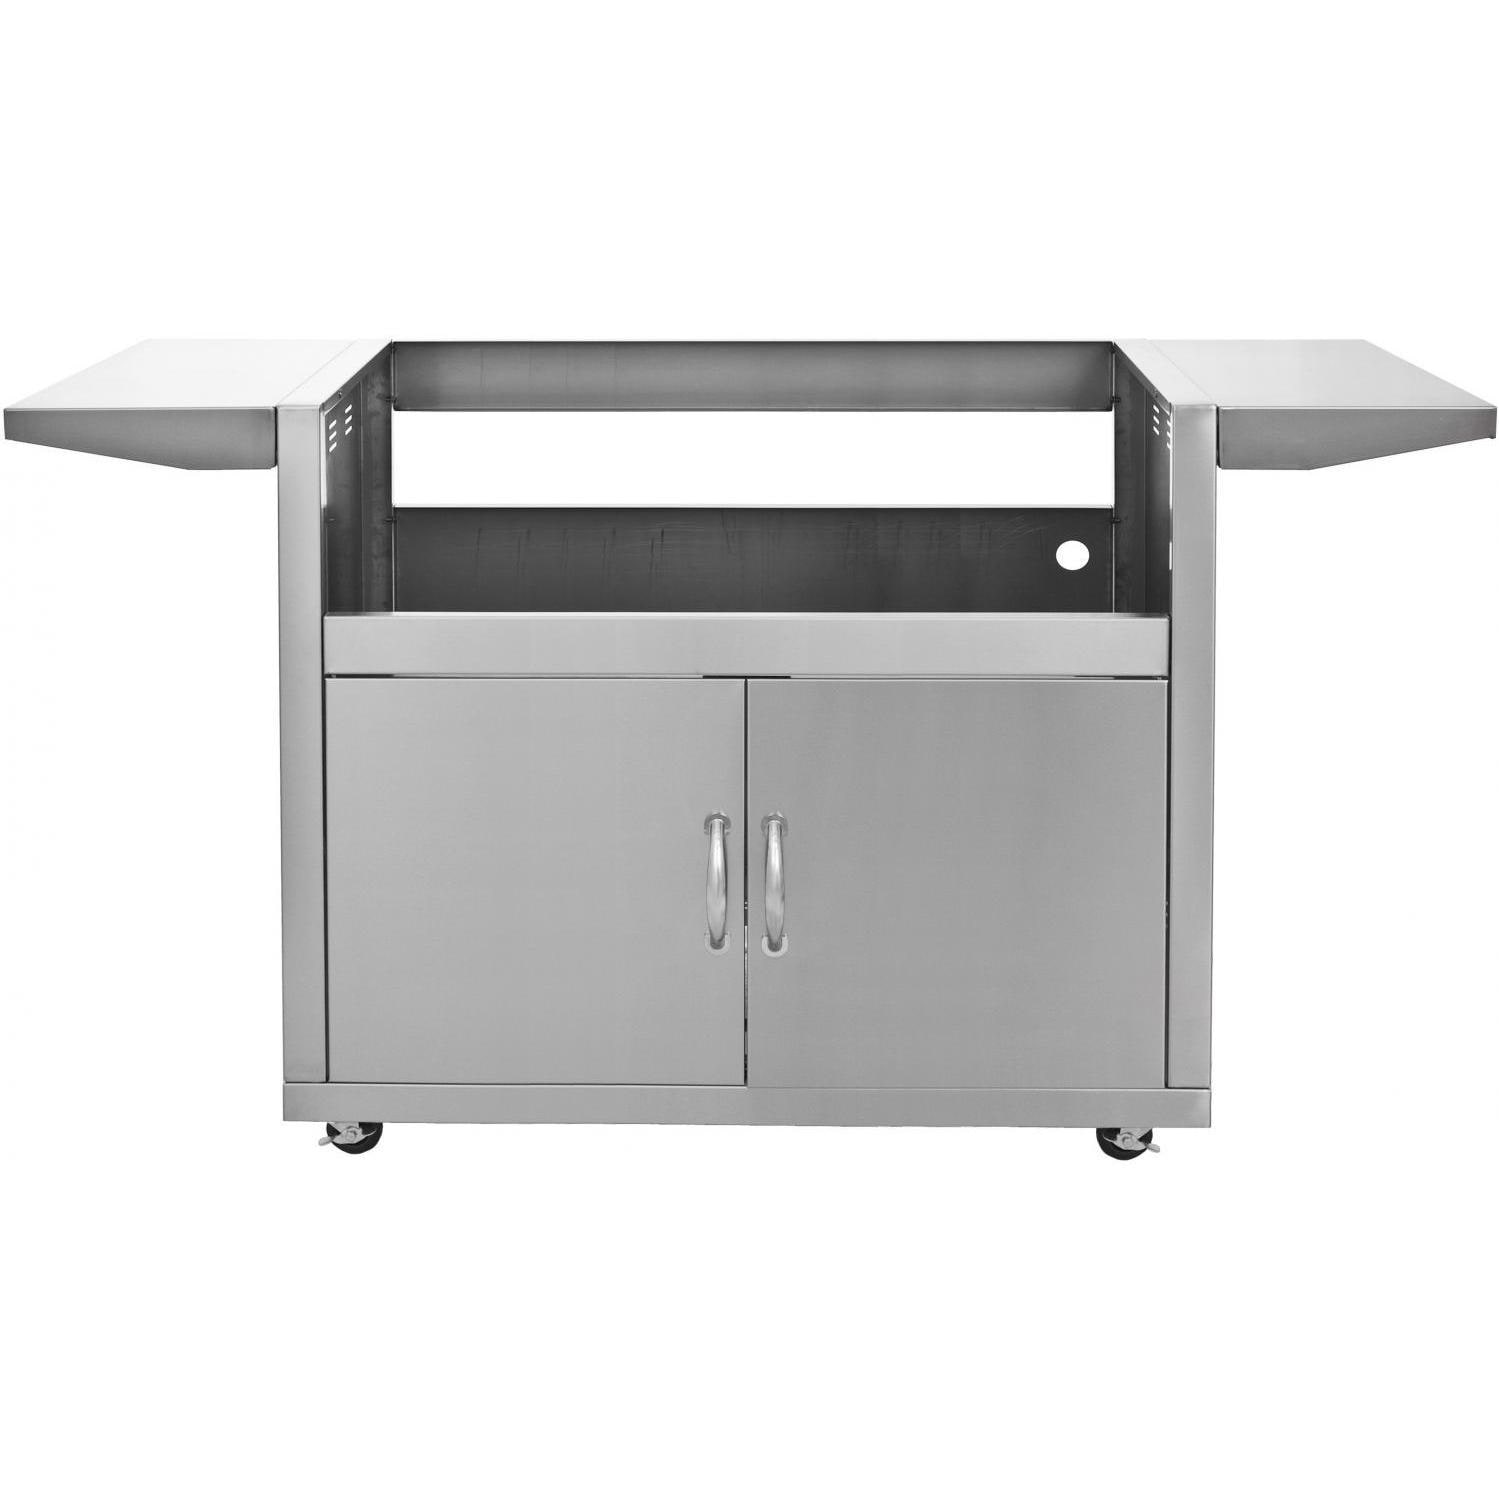 Blaze Grills Cart For 40-Inch Gas Grill - image 1 of 4